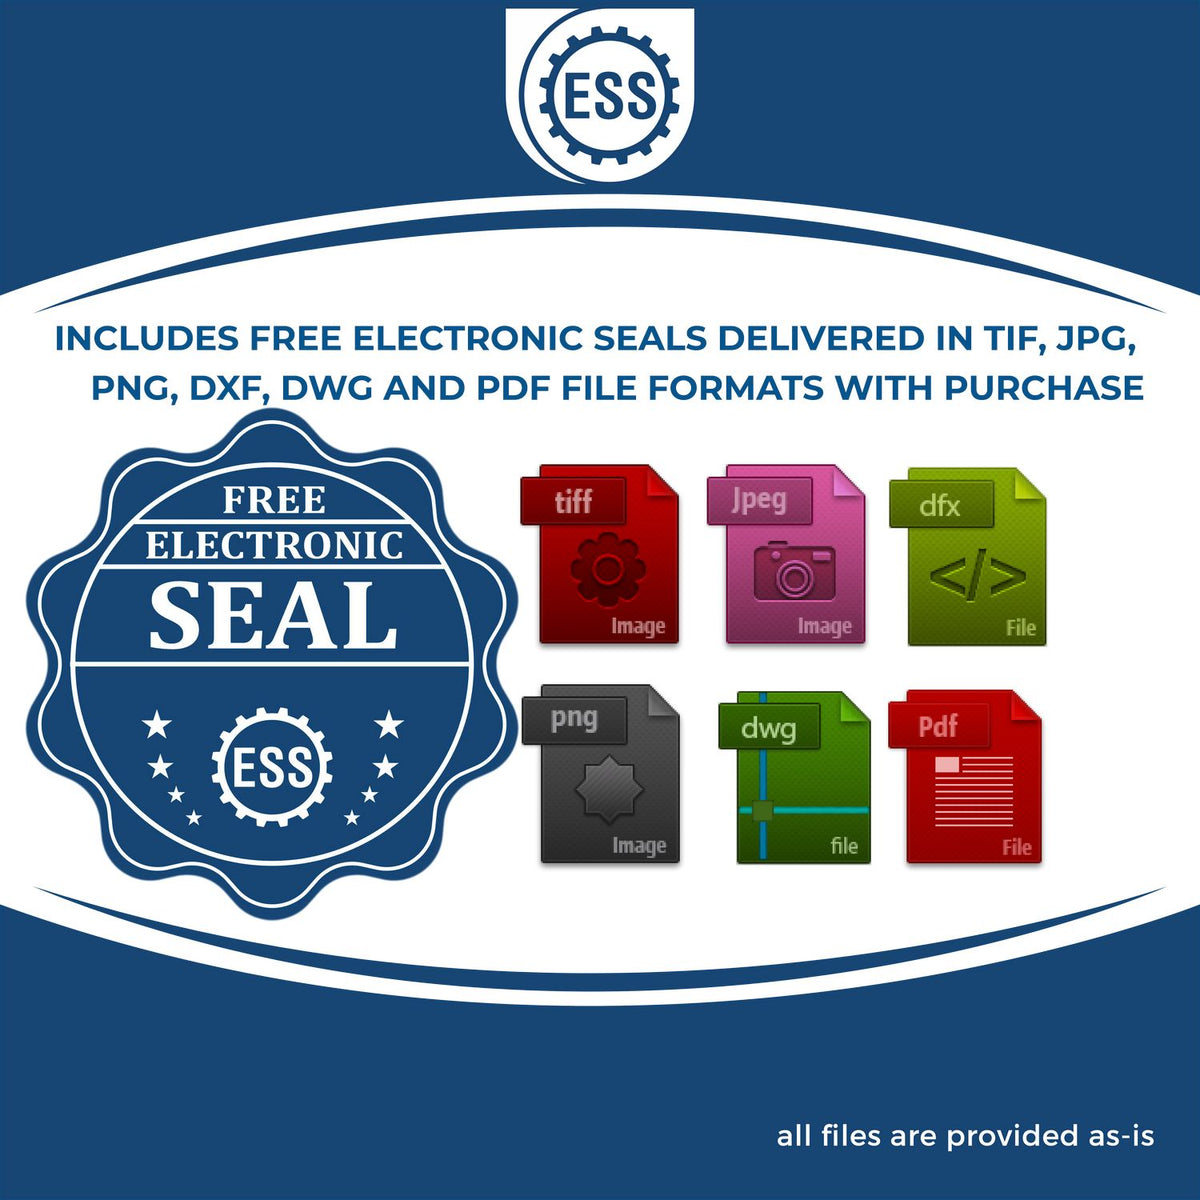 An infographic for the free electronic seal for the Slim Pre-Inked Montana Professional Geologist Seal Stamp illustrating the different file type icons such as DXF, DWG, TIF, JPG and PNG.